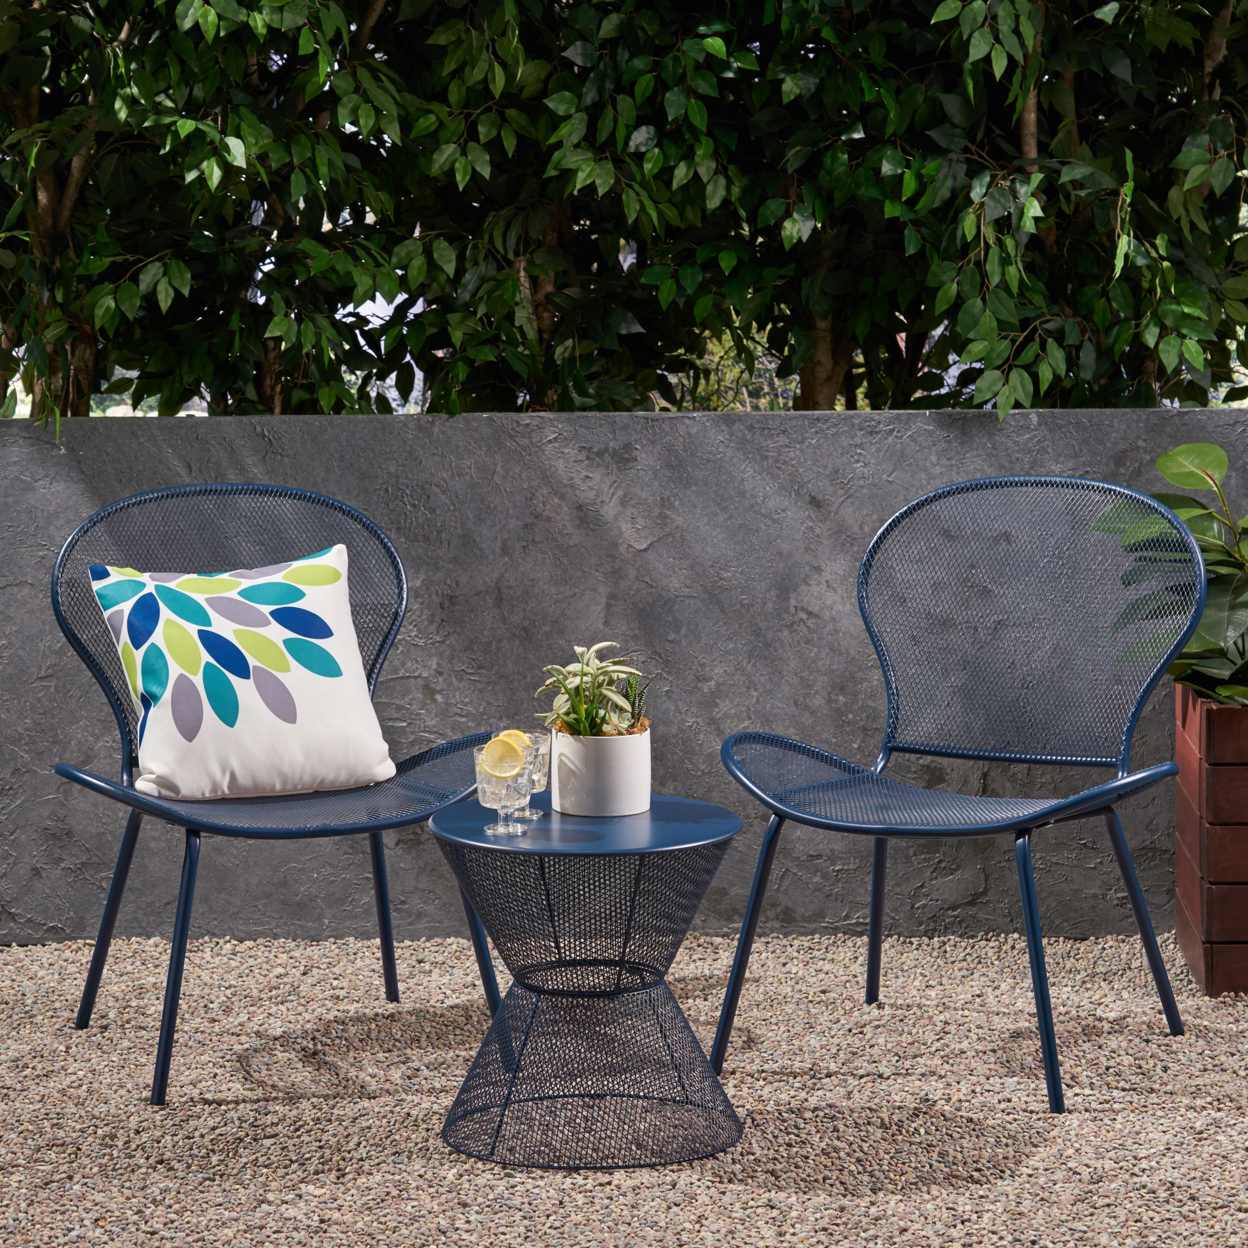 Freda Modern Outdoor 2 Seater Iron Chat Set With Side Table - Matte White